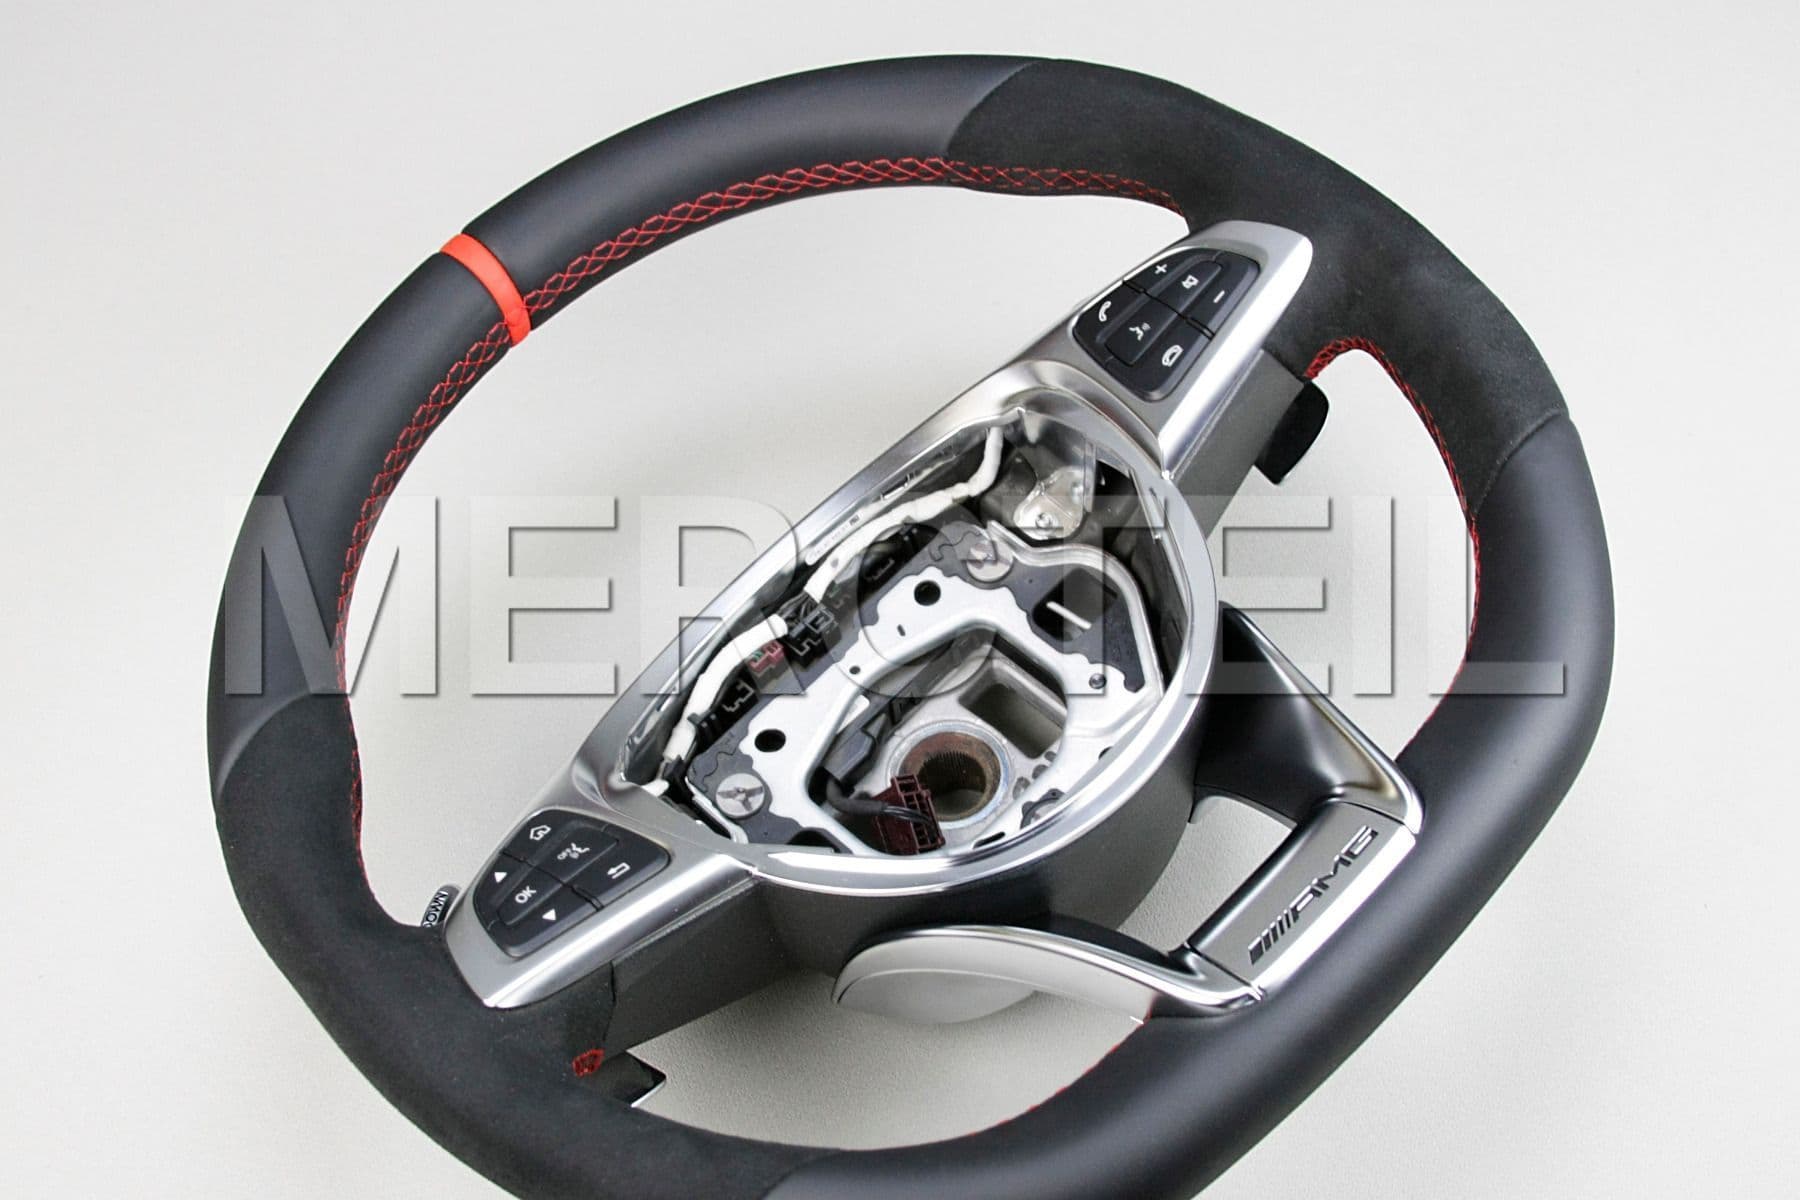 AMG Performance Black Steering Wheel for C Class, GLC Class; A20546026033D66, A2054602603.